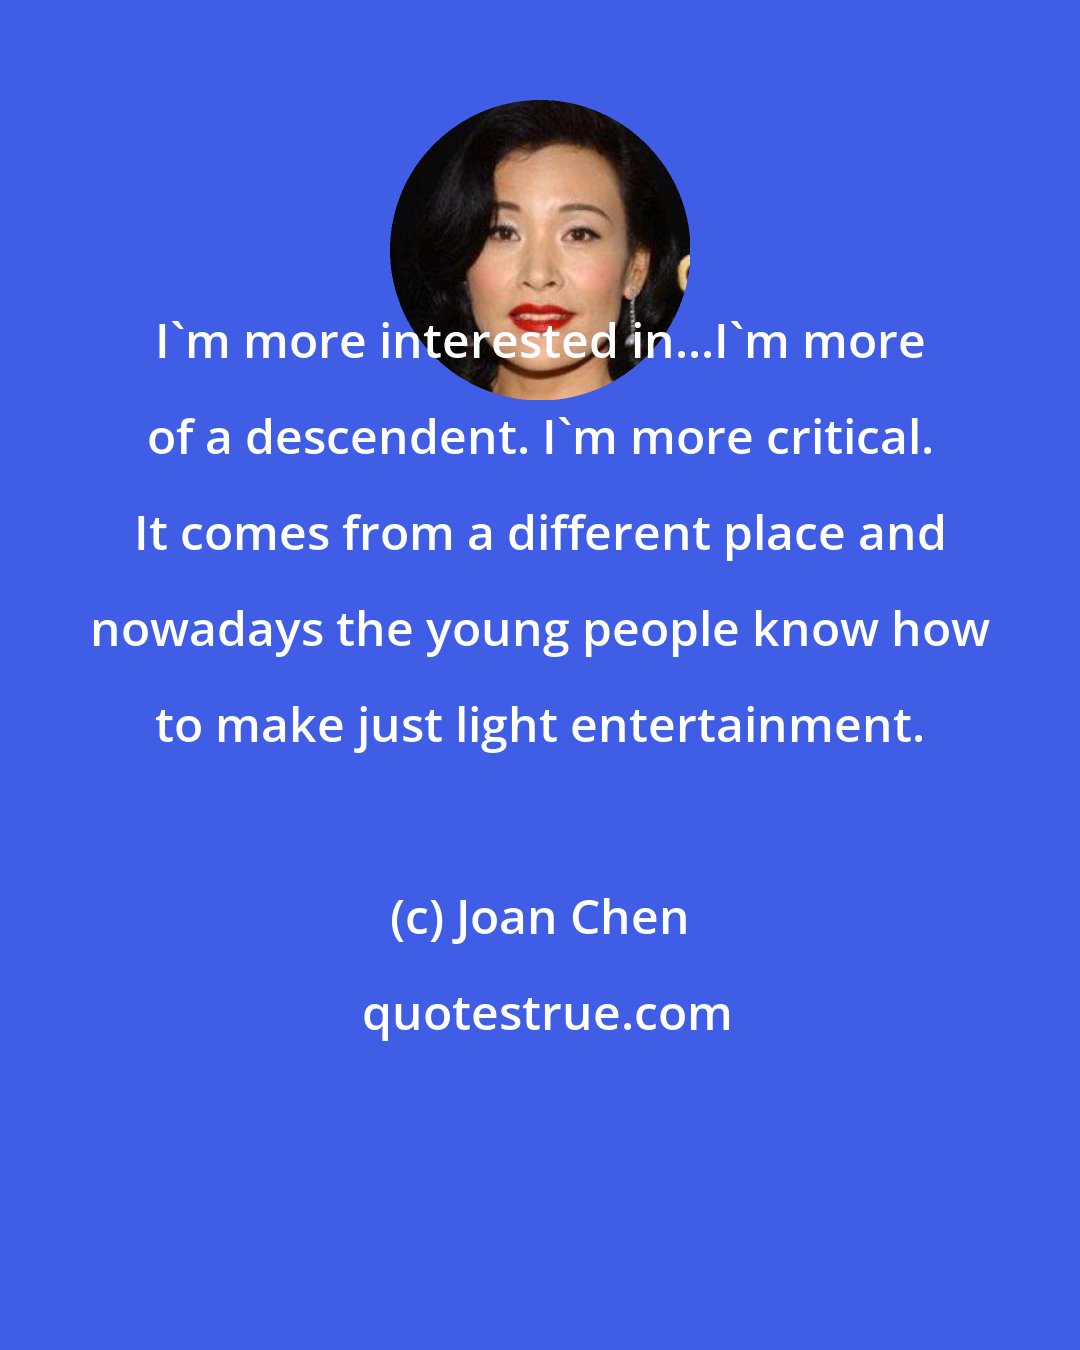 Joan Chen: I'm more interested in...I'm more of a descendent. I'm more critical. It comes from a different place and nowadays the young people know how to make just light entertainment.